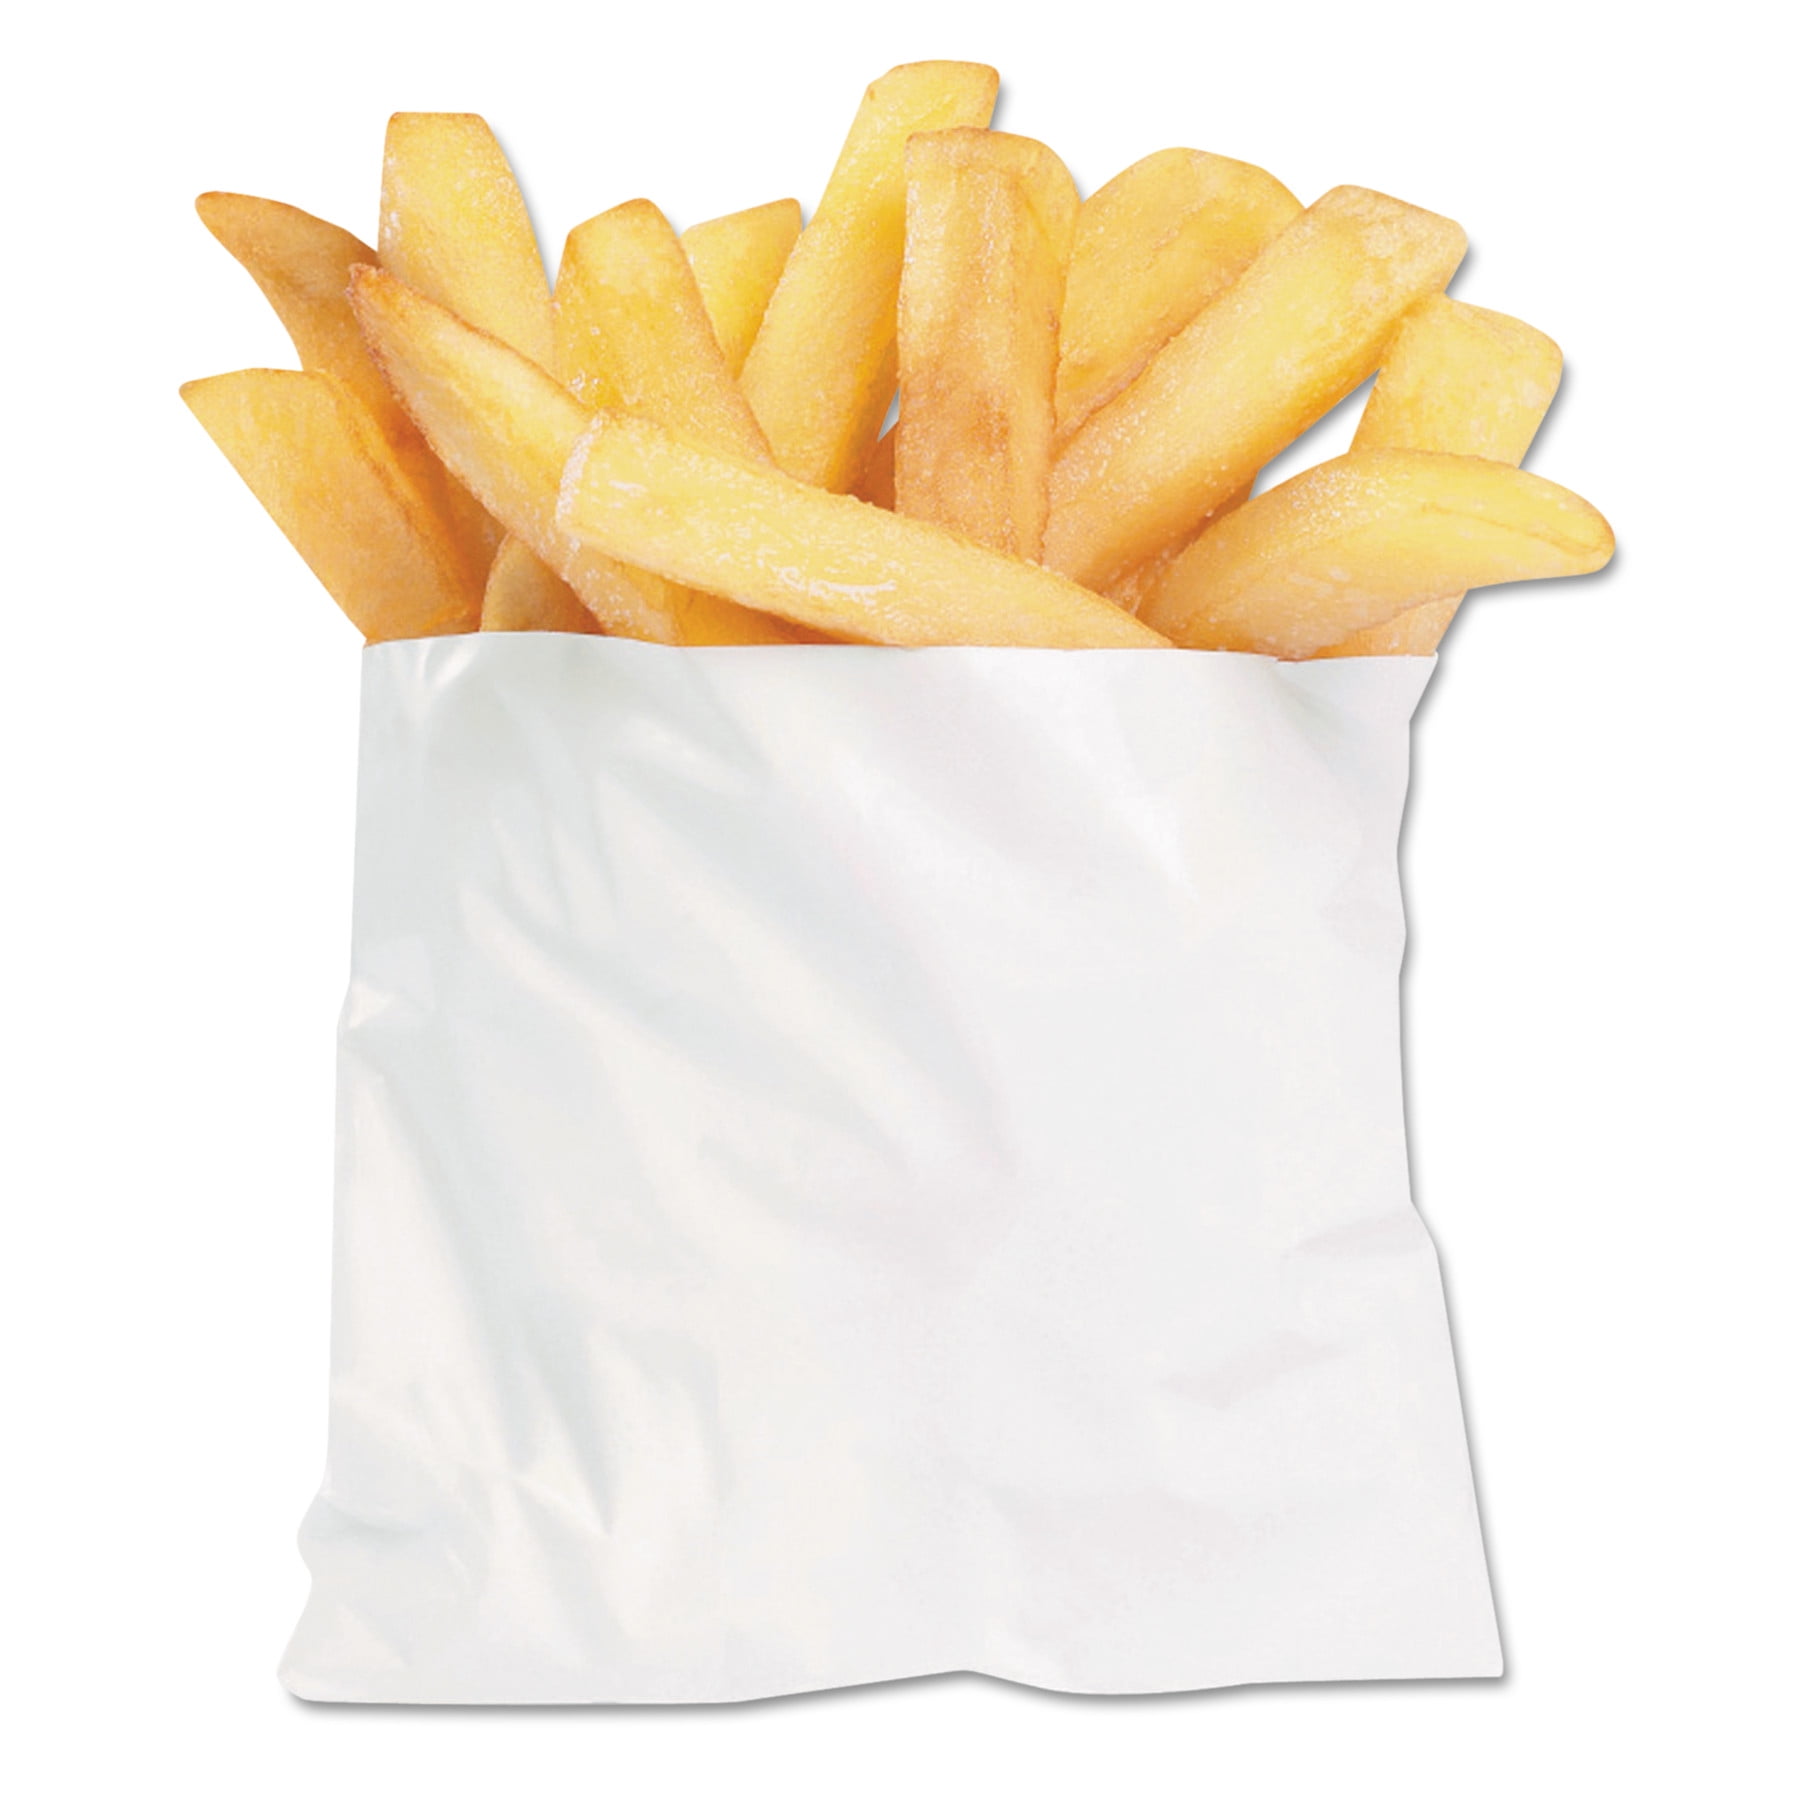 100 Bags & More Heavy Duty Disposable Fries Container| Grease & Leak Resistant Scarsdale Supplies Large Printed French Fry Bags Great for Parties Restaurant Carnivals 